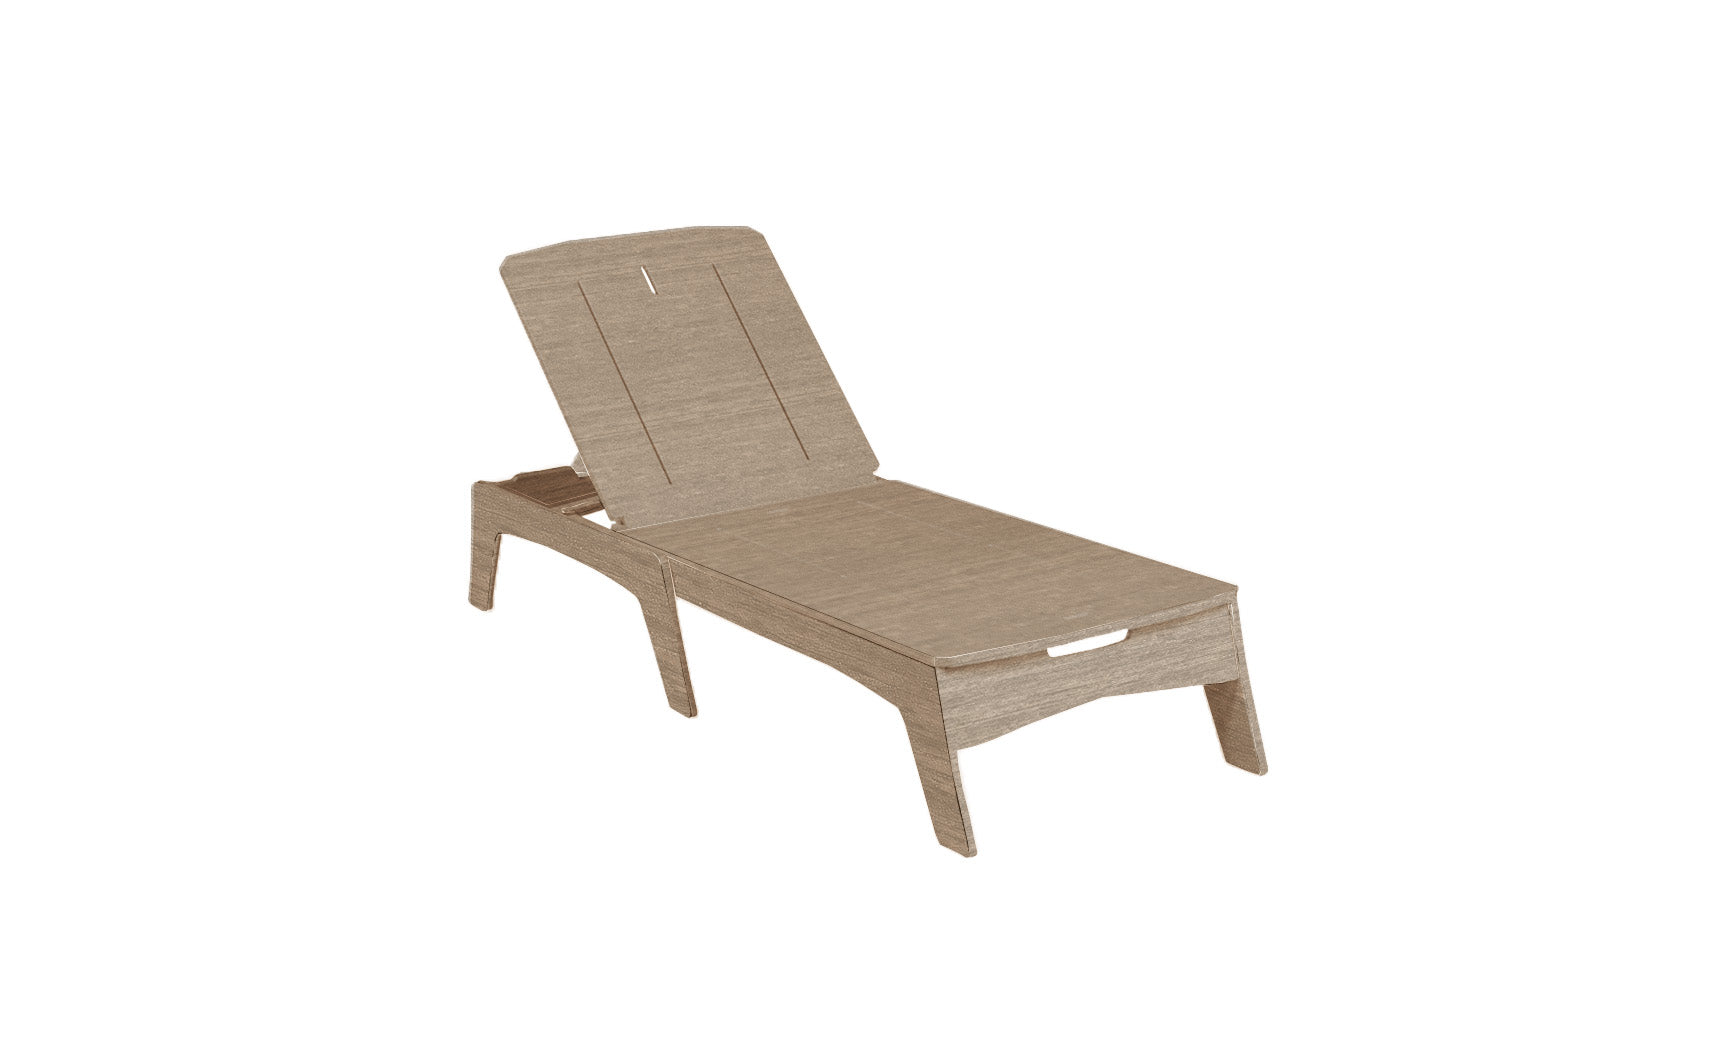 Mainstay Chaise